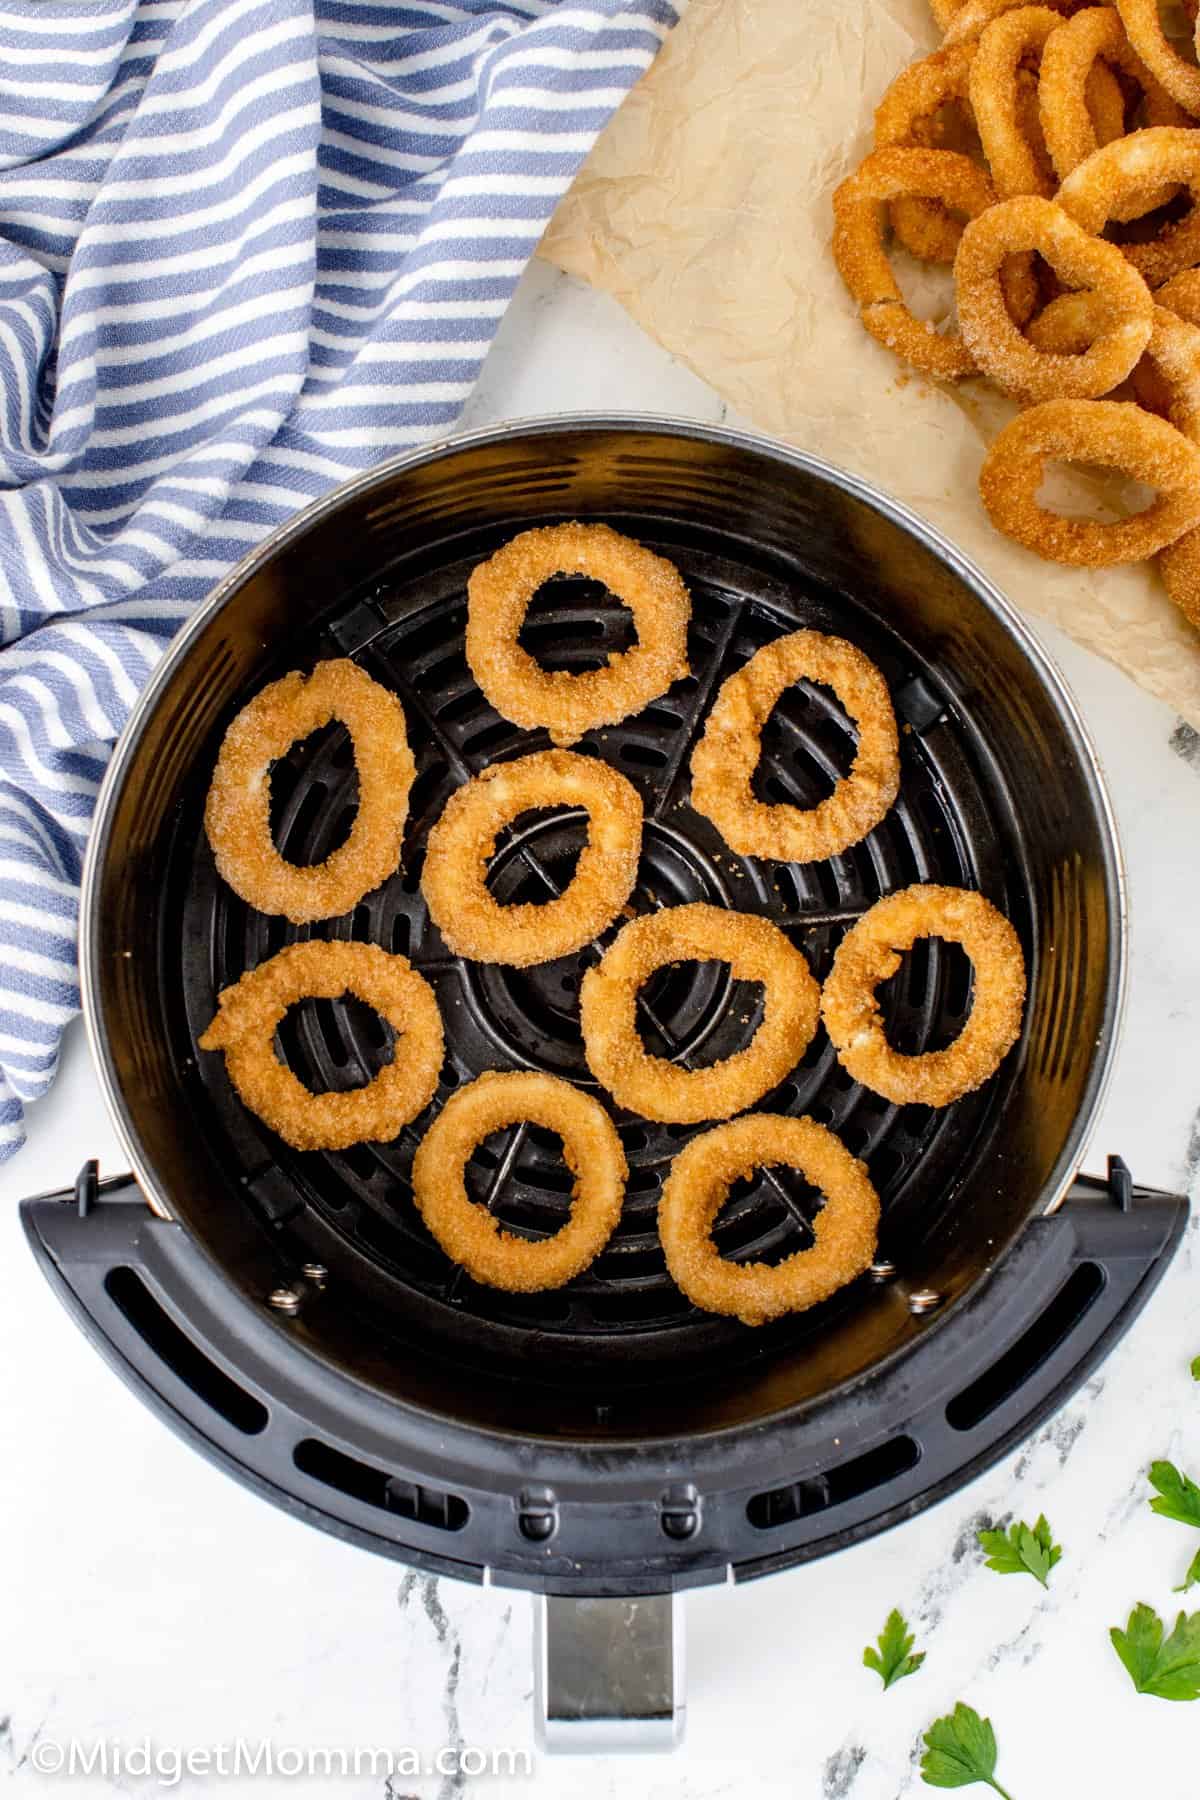 Frozen Onion Rings in the Air Fryer - Mindy's Cooking Obsession